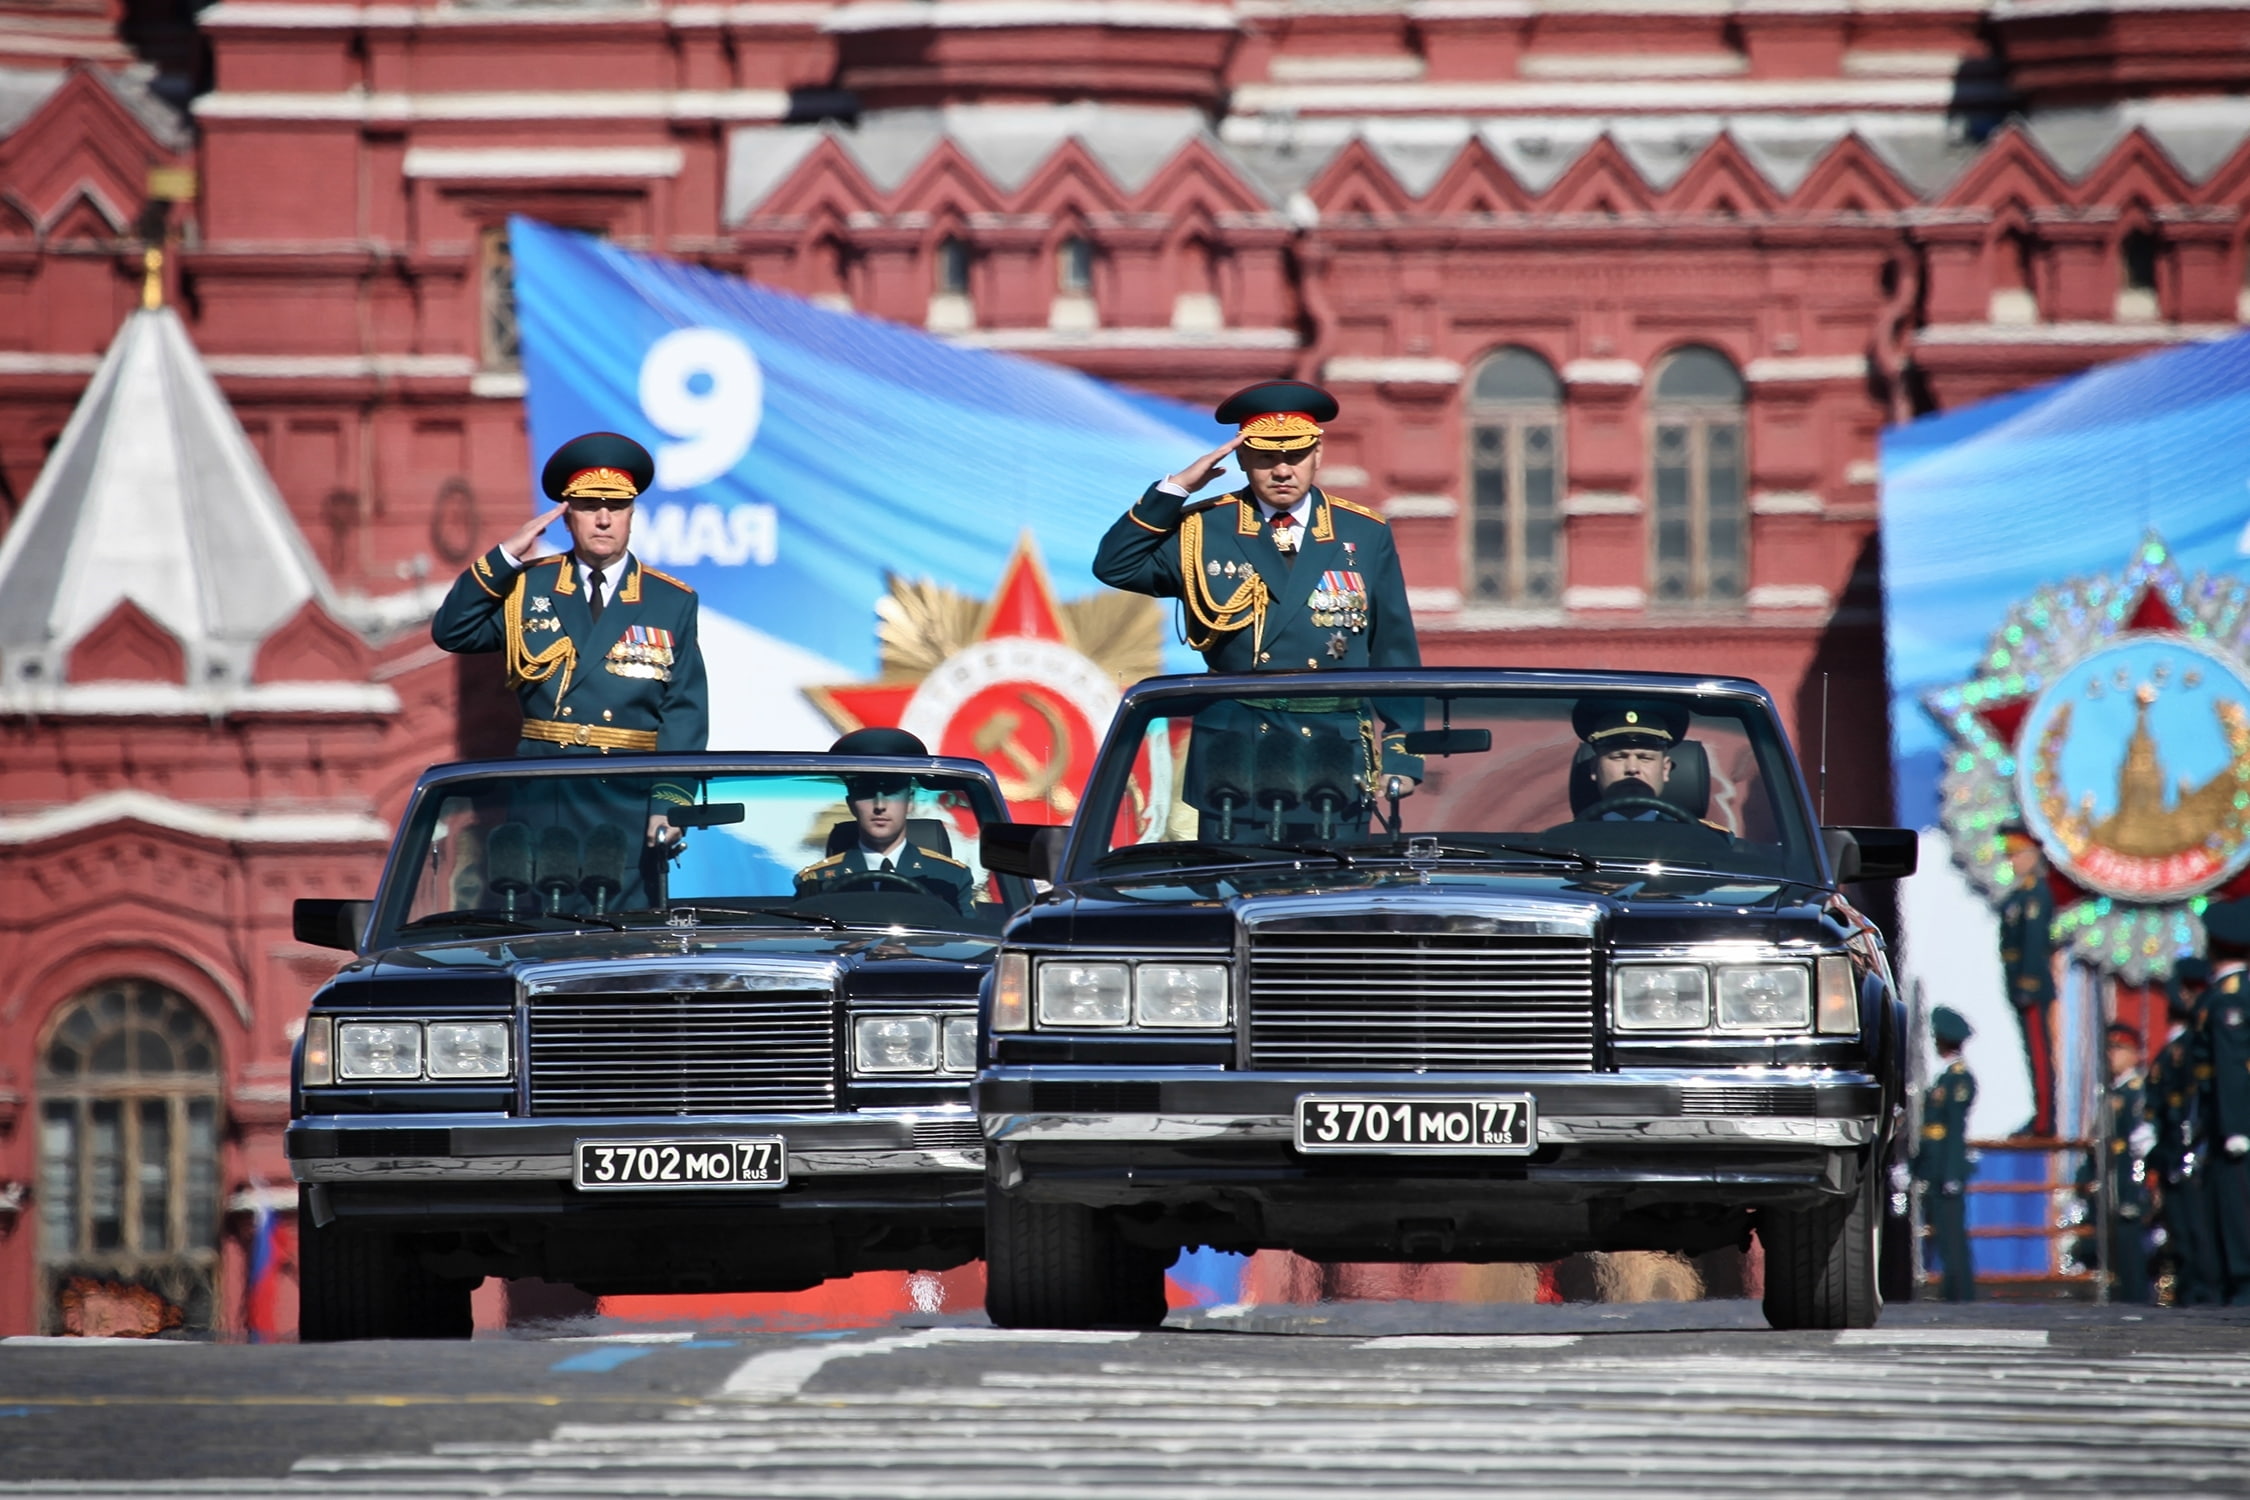 holiday, parade, Russia, May 9, ZIL, Victory Parade, Red Square